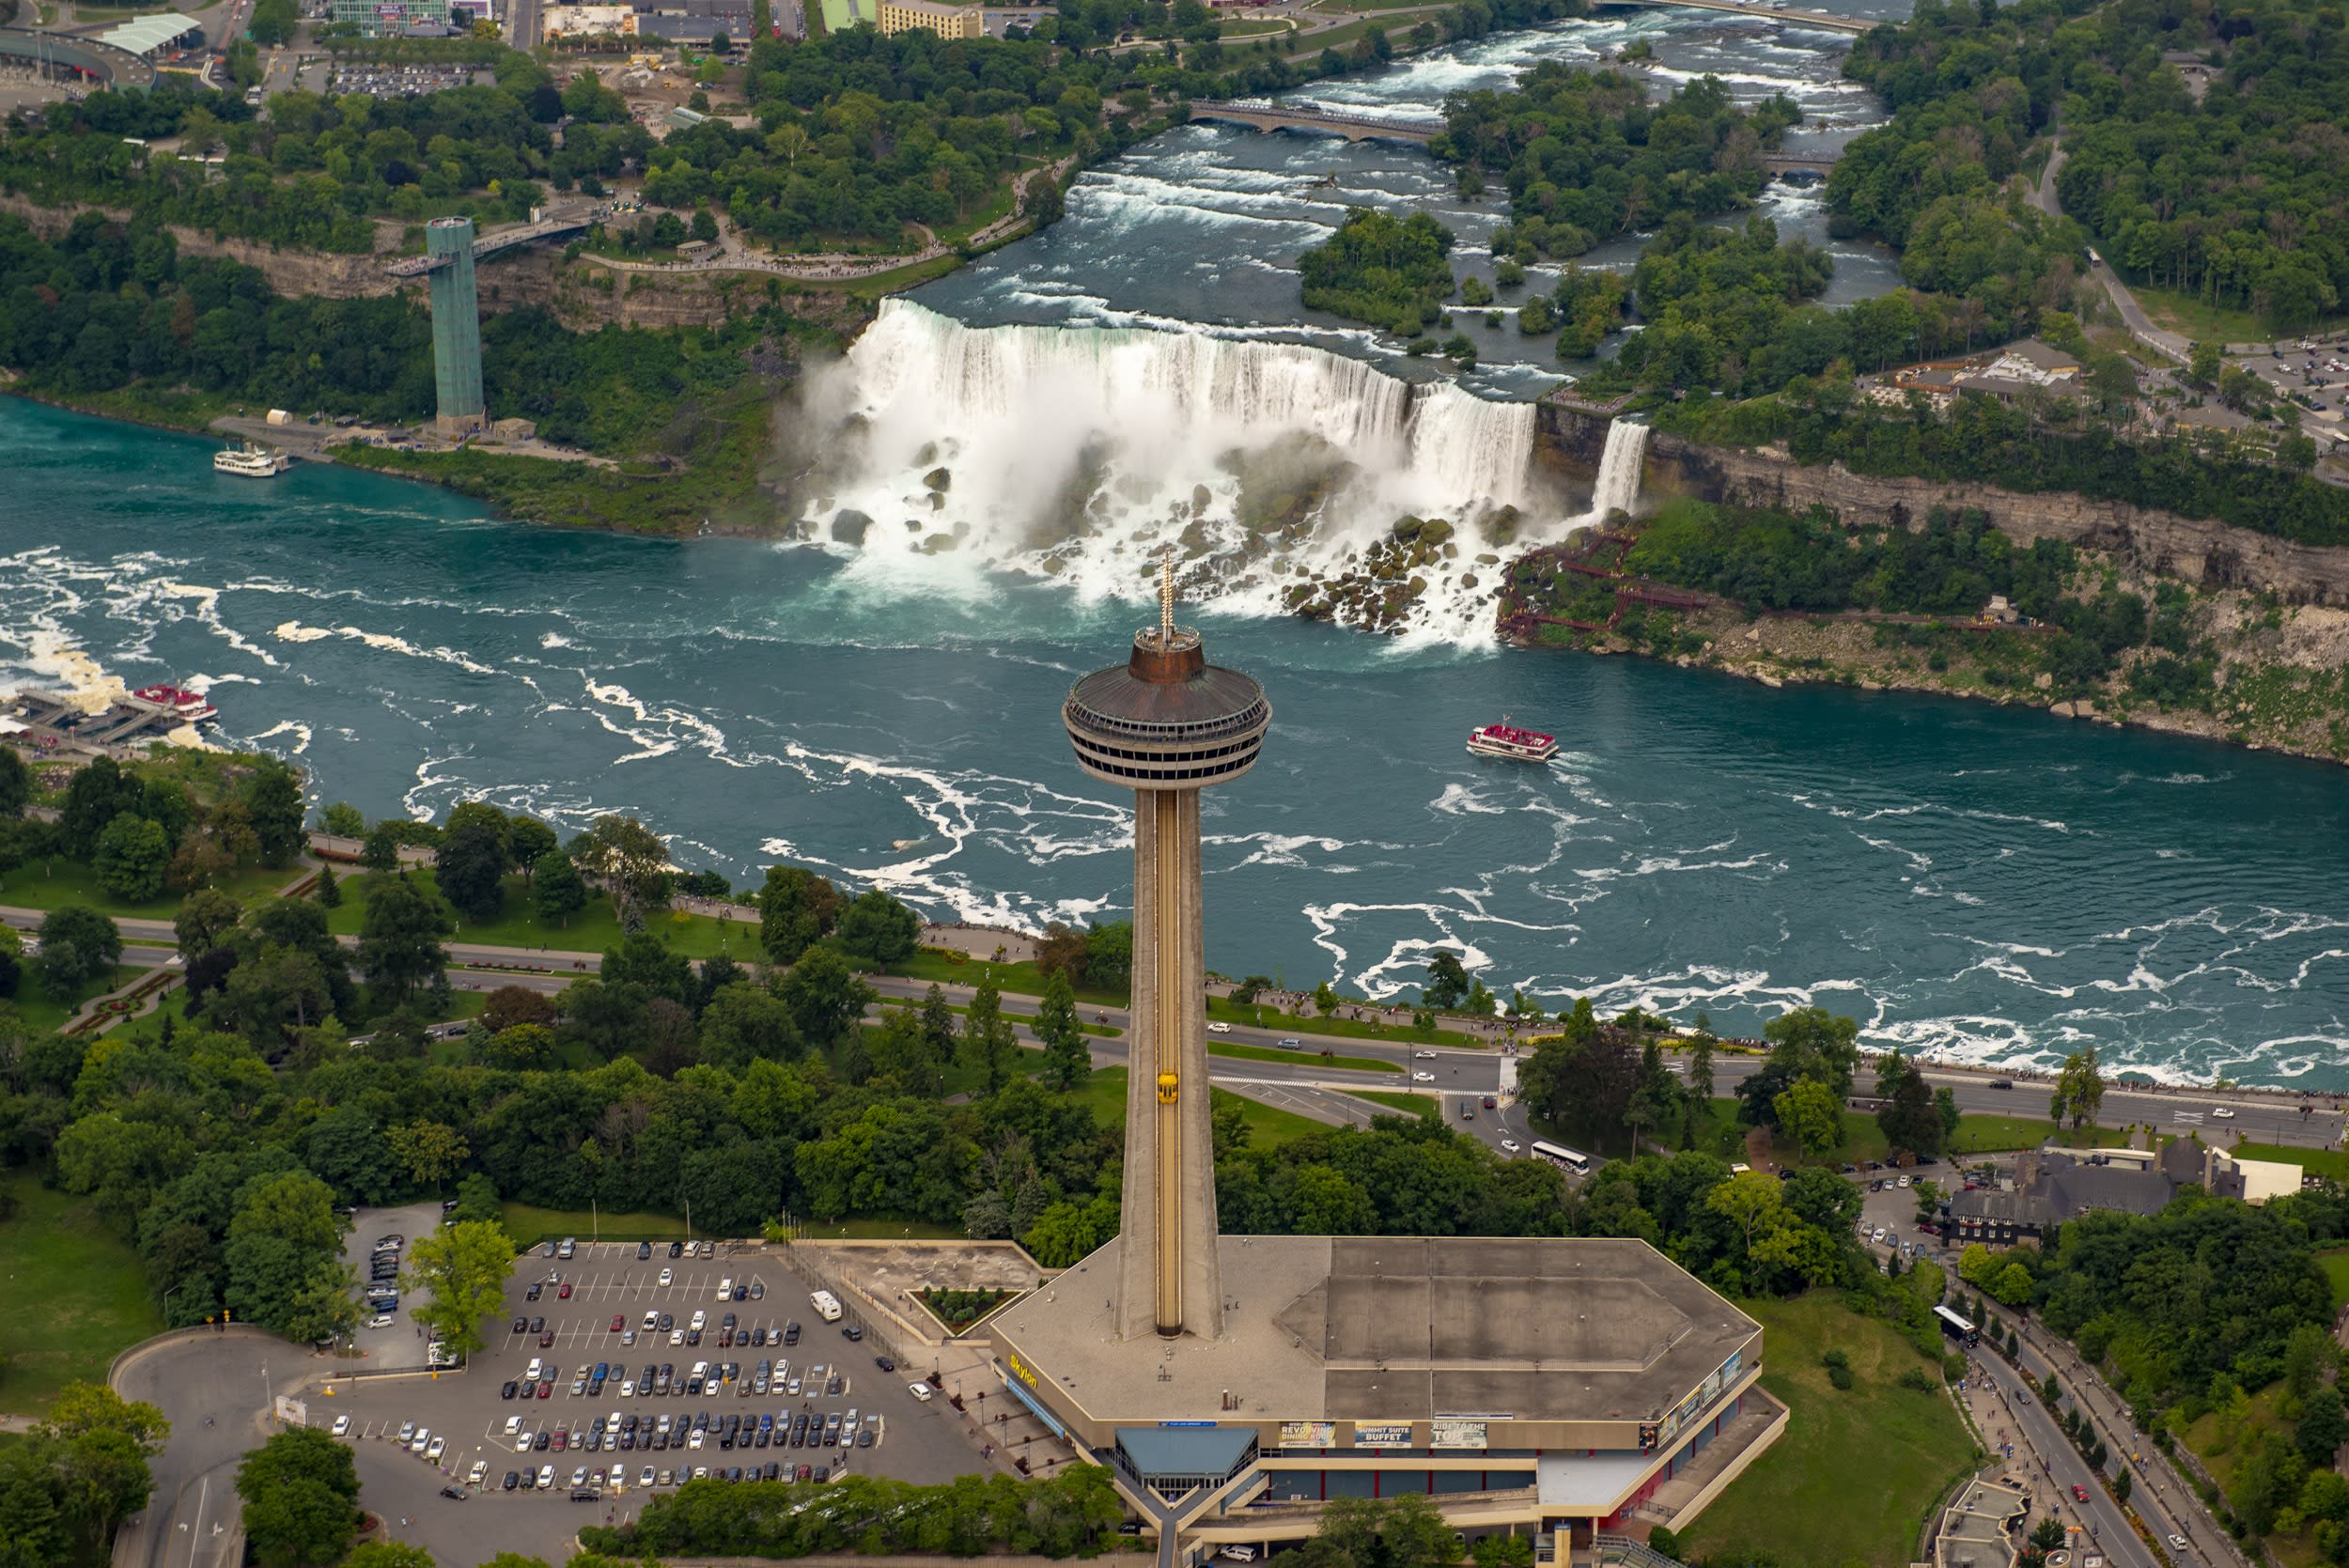 The Skylon Tower is an observation tower in Niagara Falls, Ontario